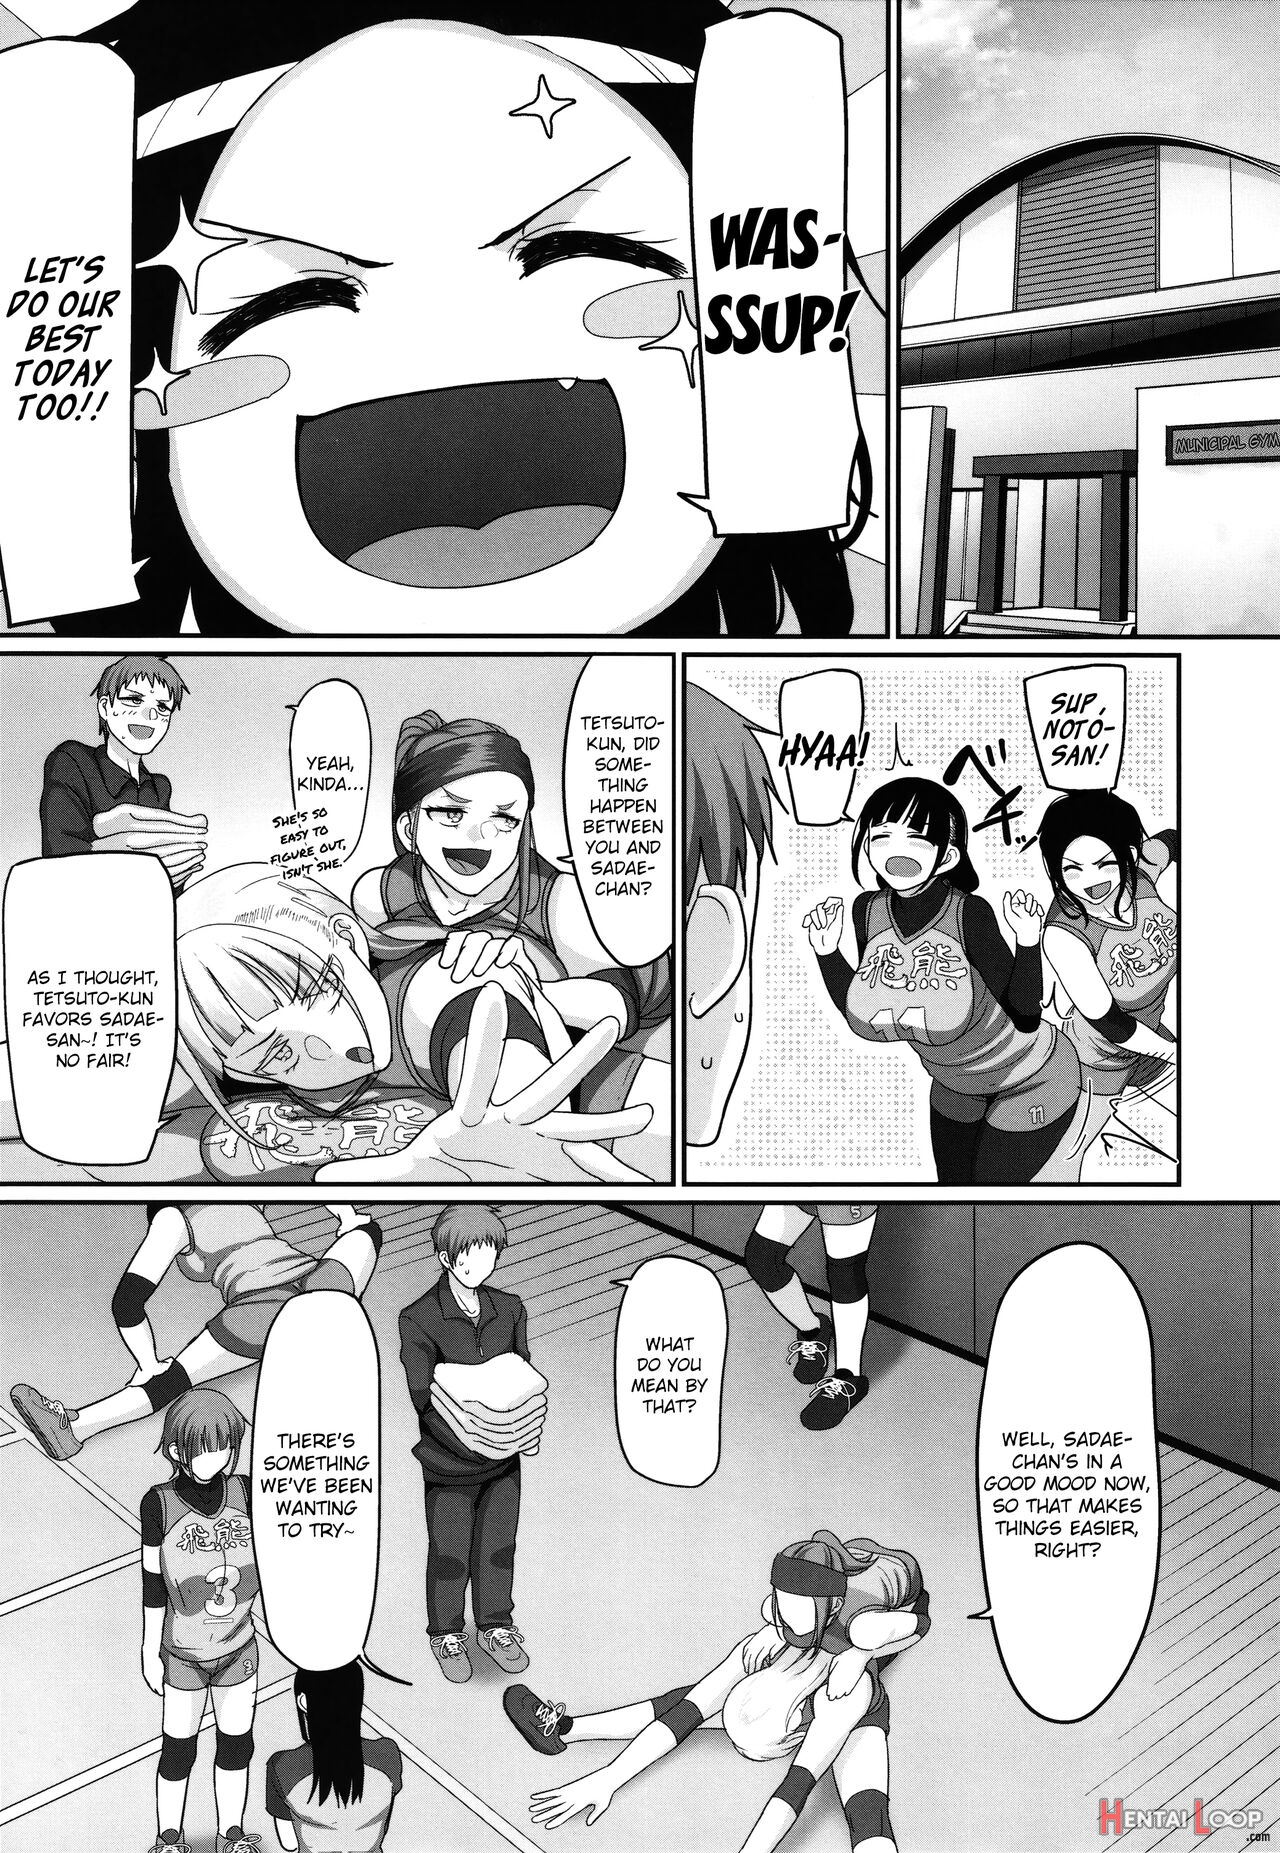 Affairs Of The Women's Volleyball Circle Of K City, S Prefecture 1 page 185